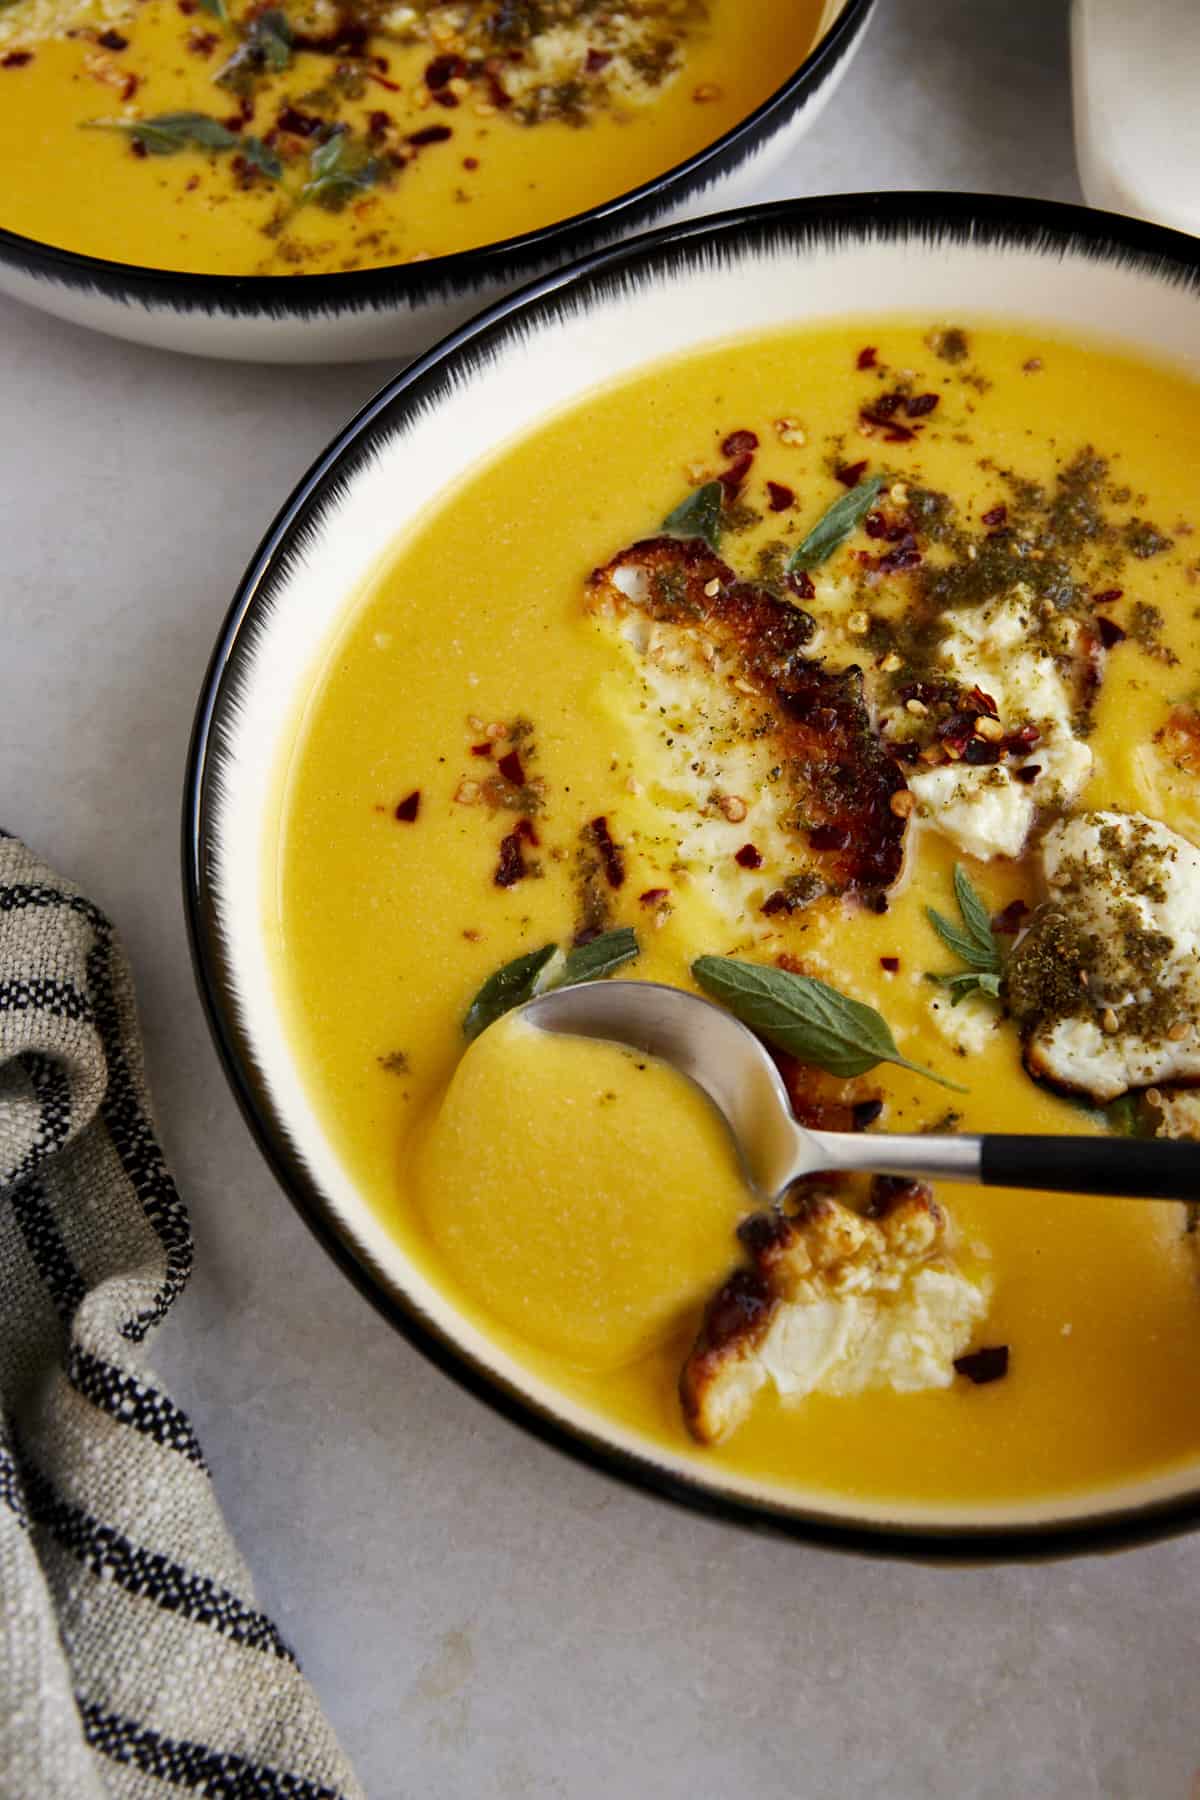 A spoon scooping a bite of roasted butternut squash soup with feta crisps. 